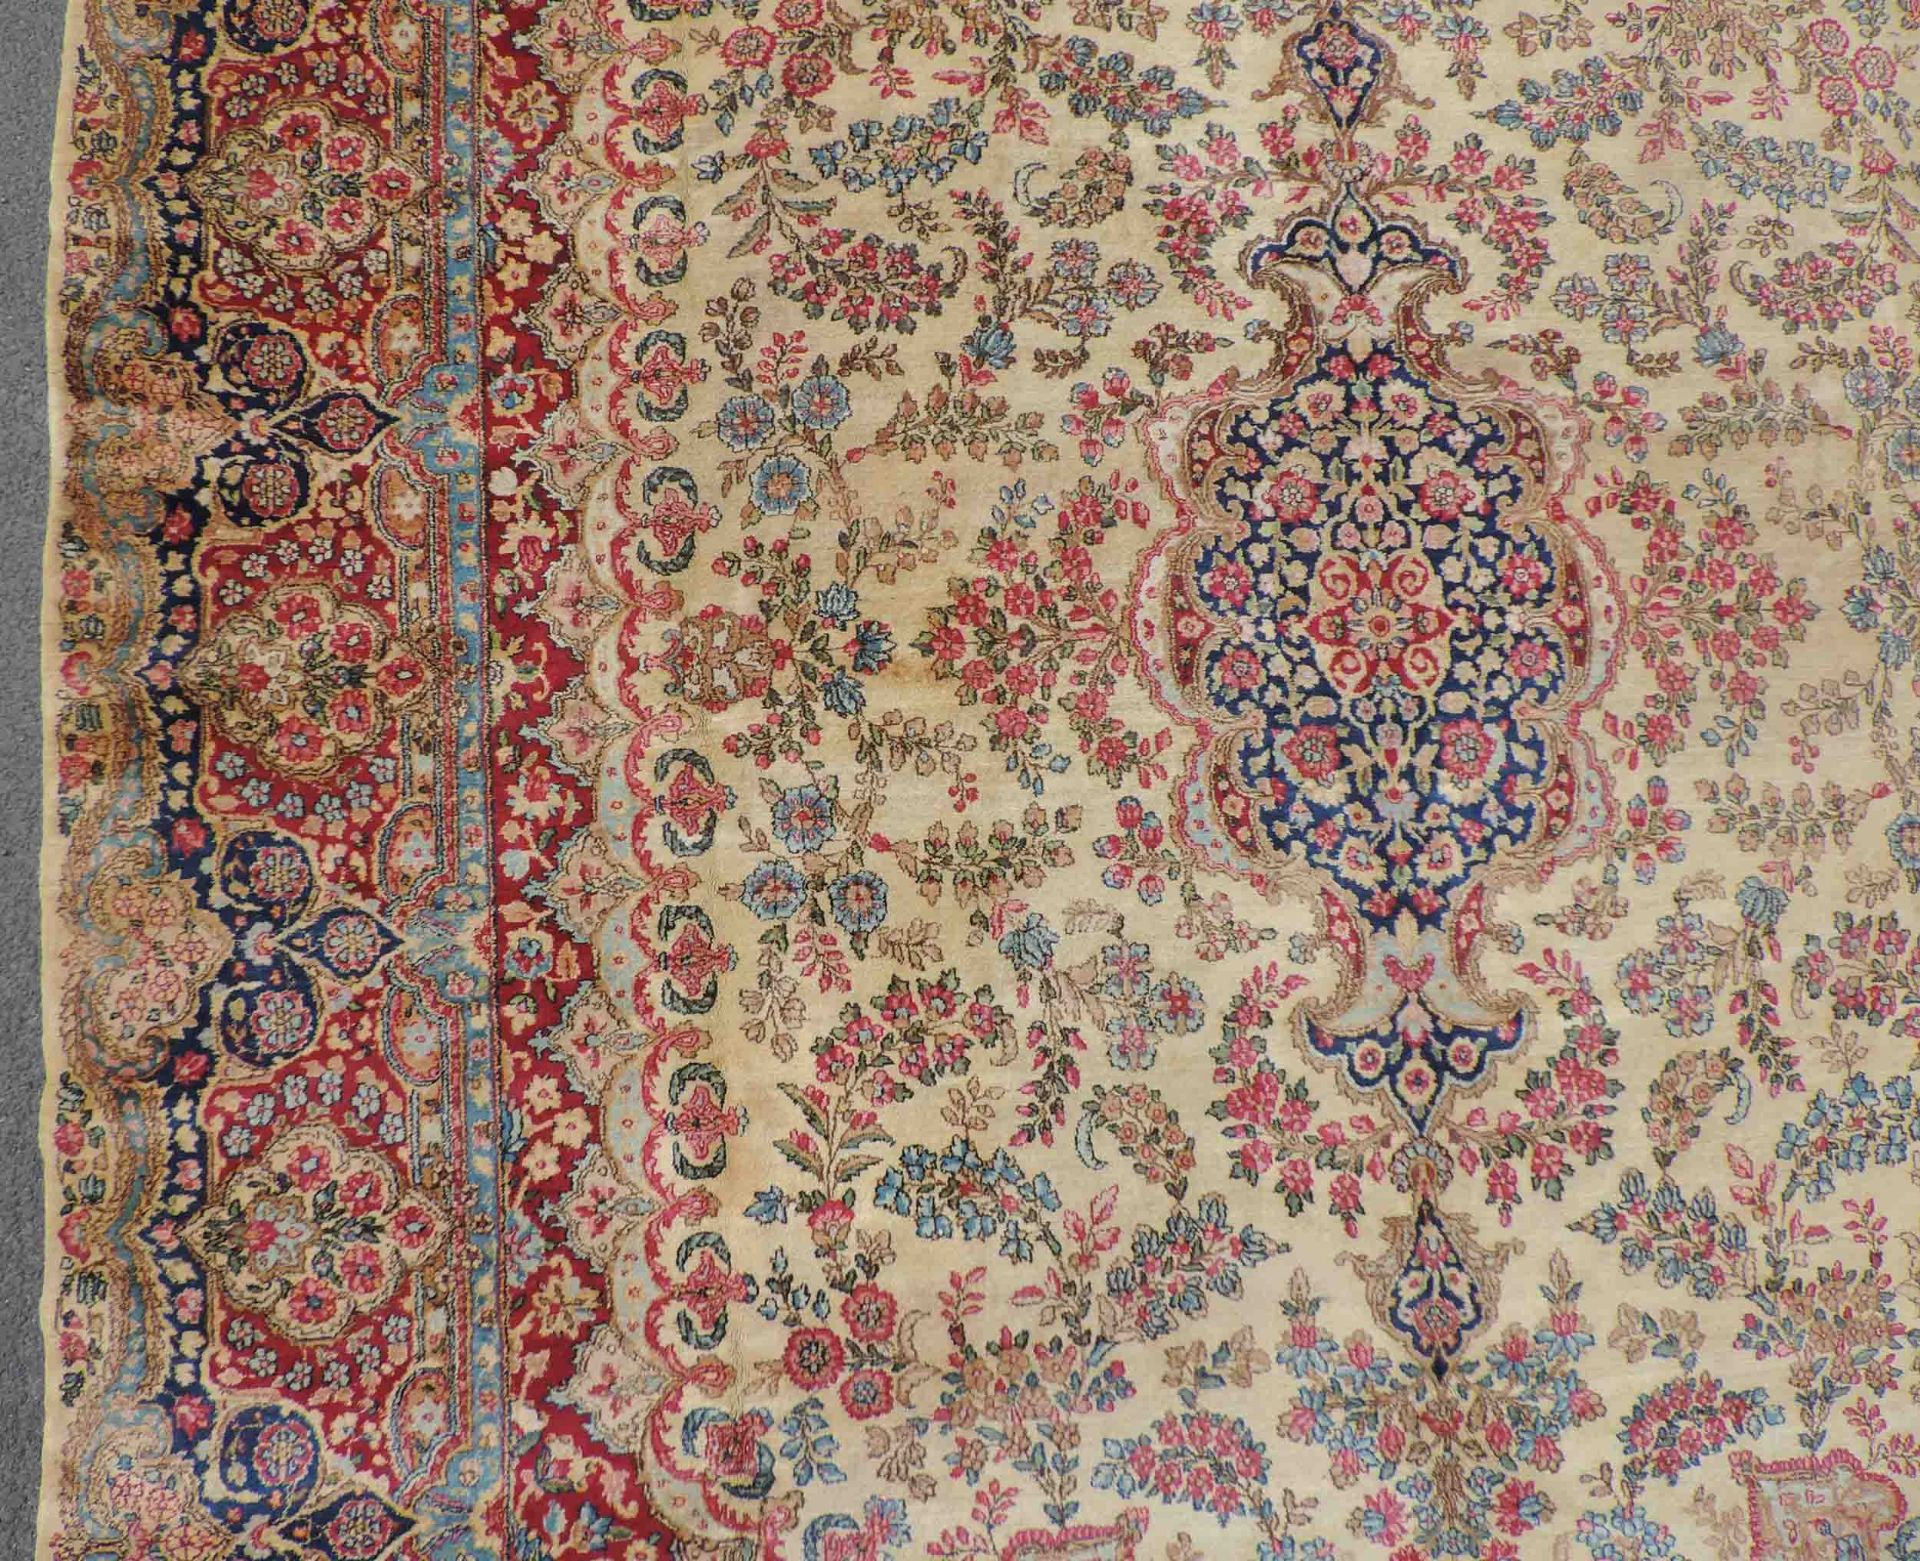 Kirman Persian carpet. Iran. Old, 1st half of the 20th century.420 cm x 297 cm. Knotted by hand. - Image 10 of 14